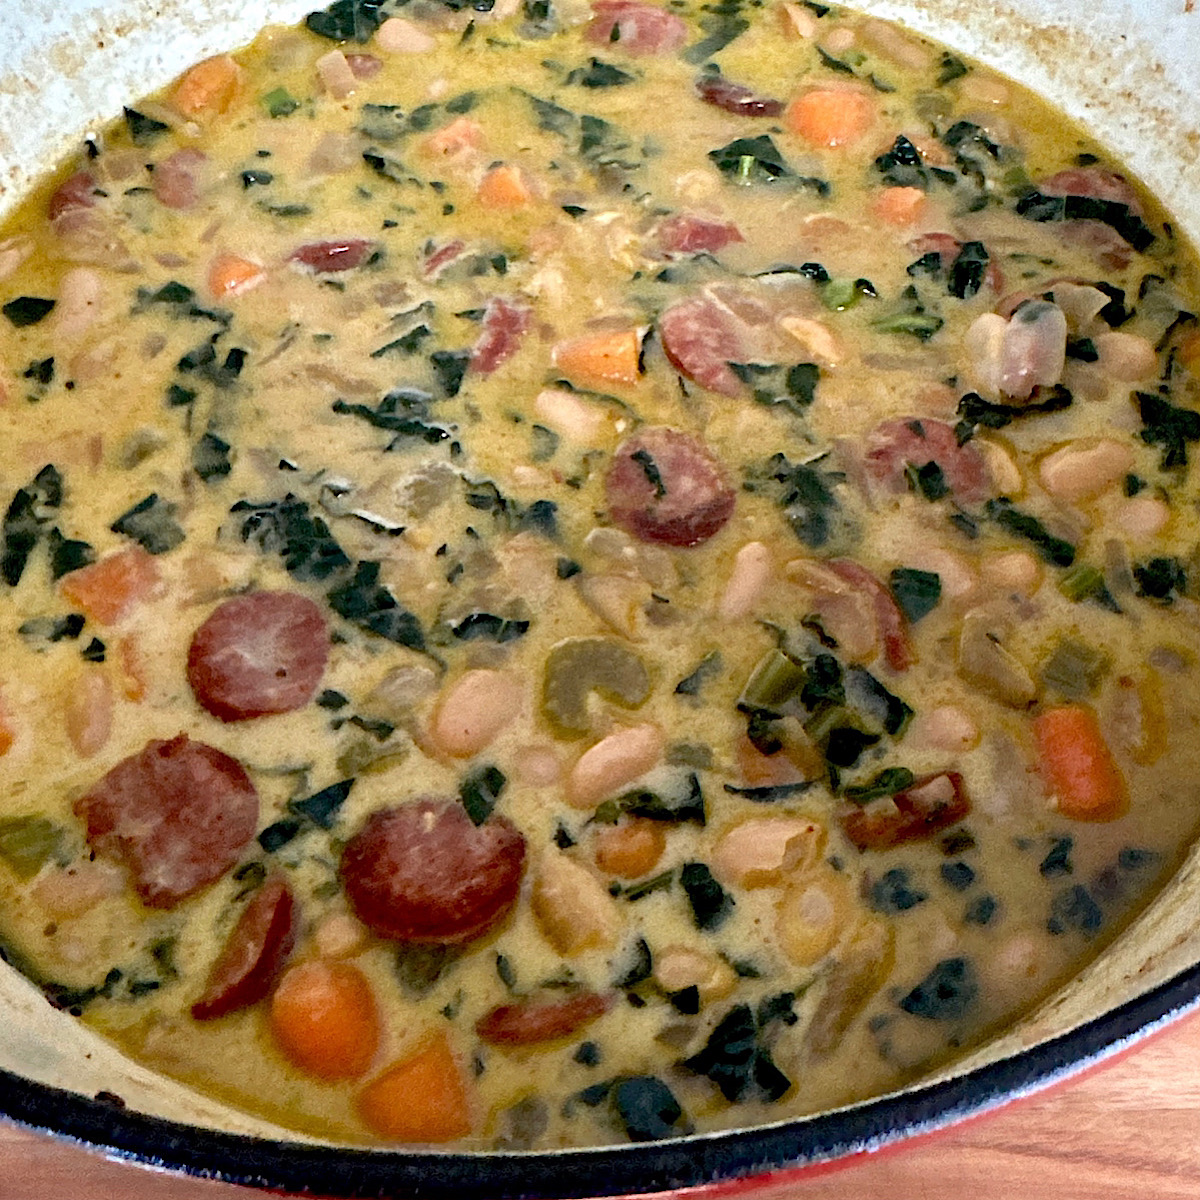 Italian bean, kale sausage stew with heavy cream added in.